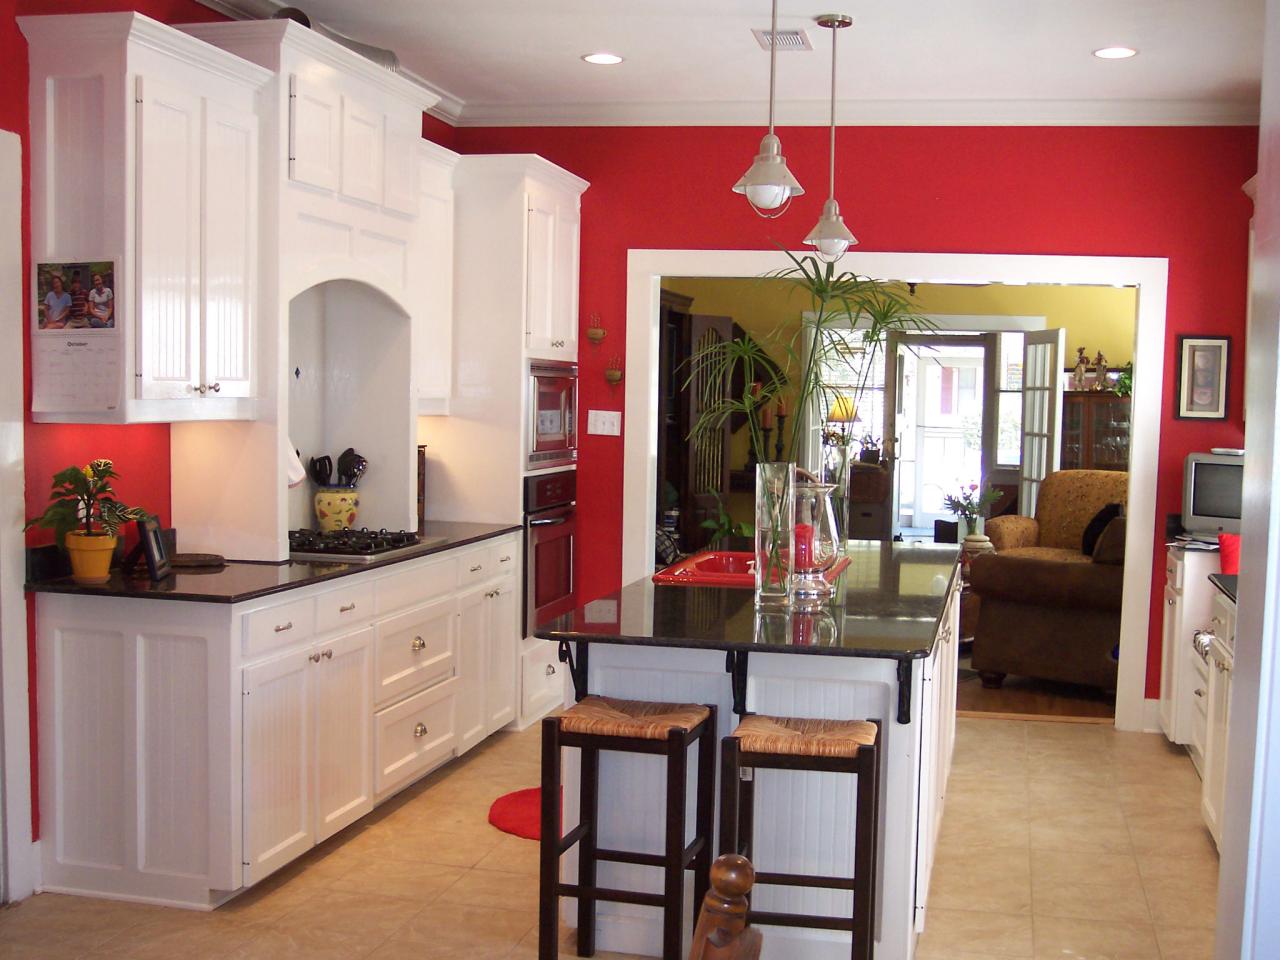 kitchen color ideas what colors to paint a kitchen RQYGGFO